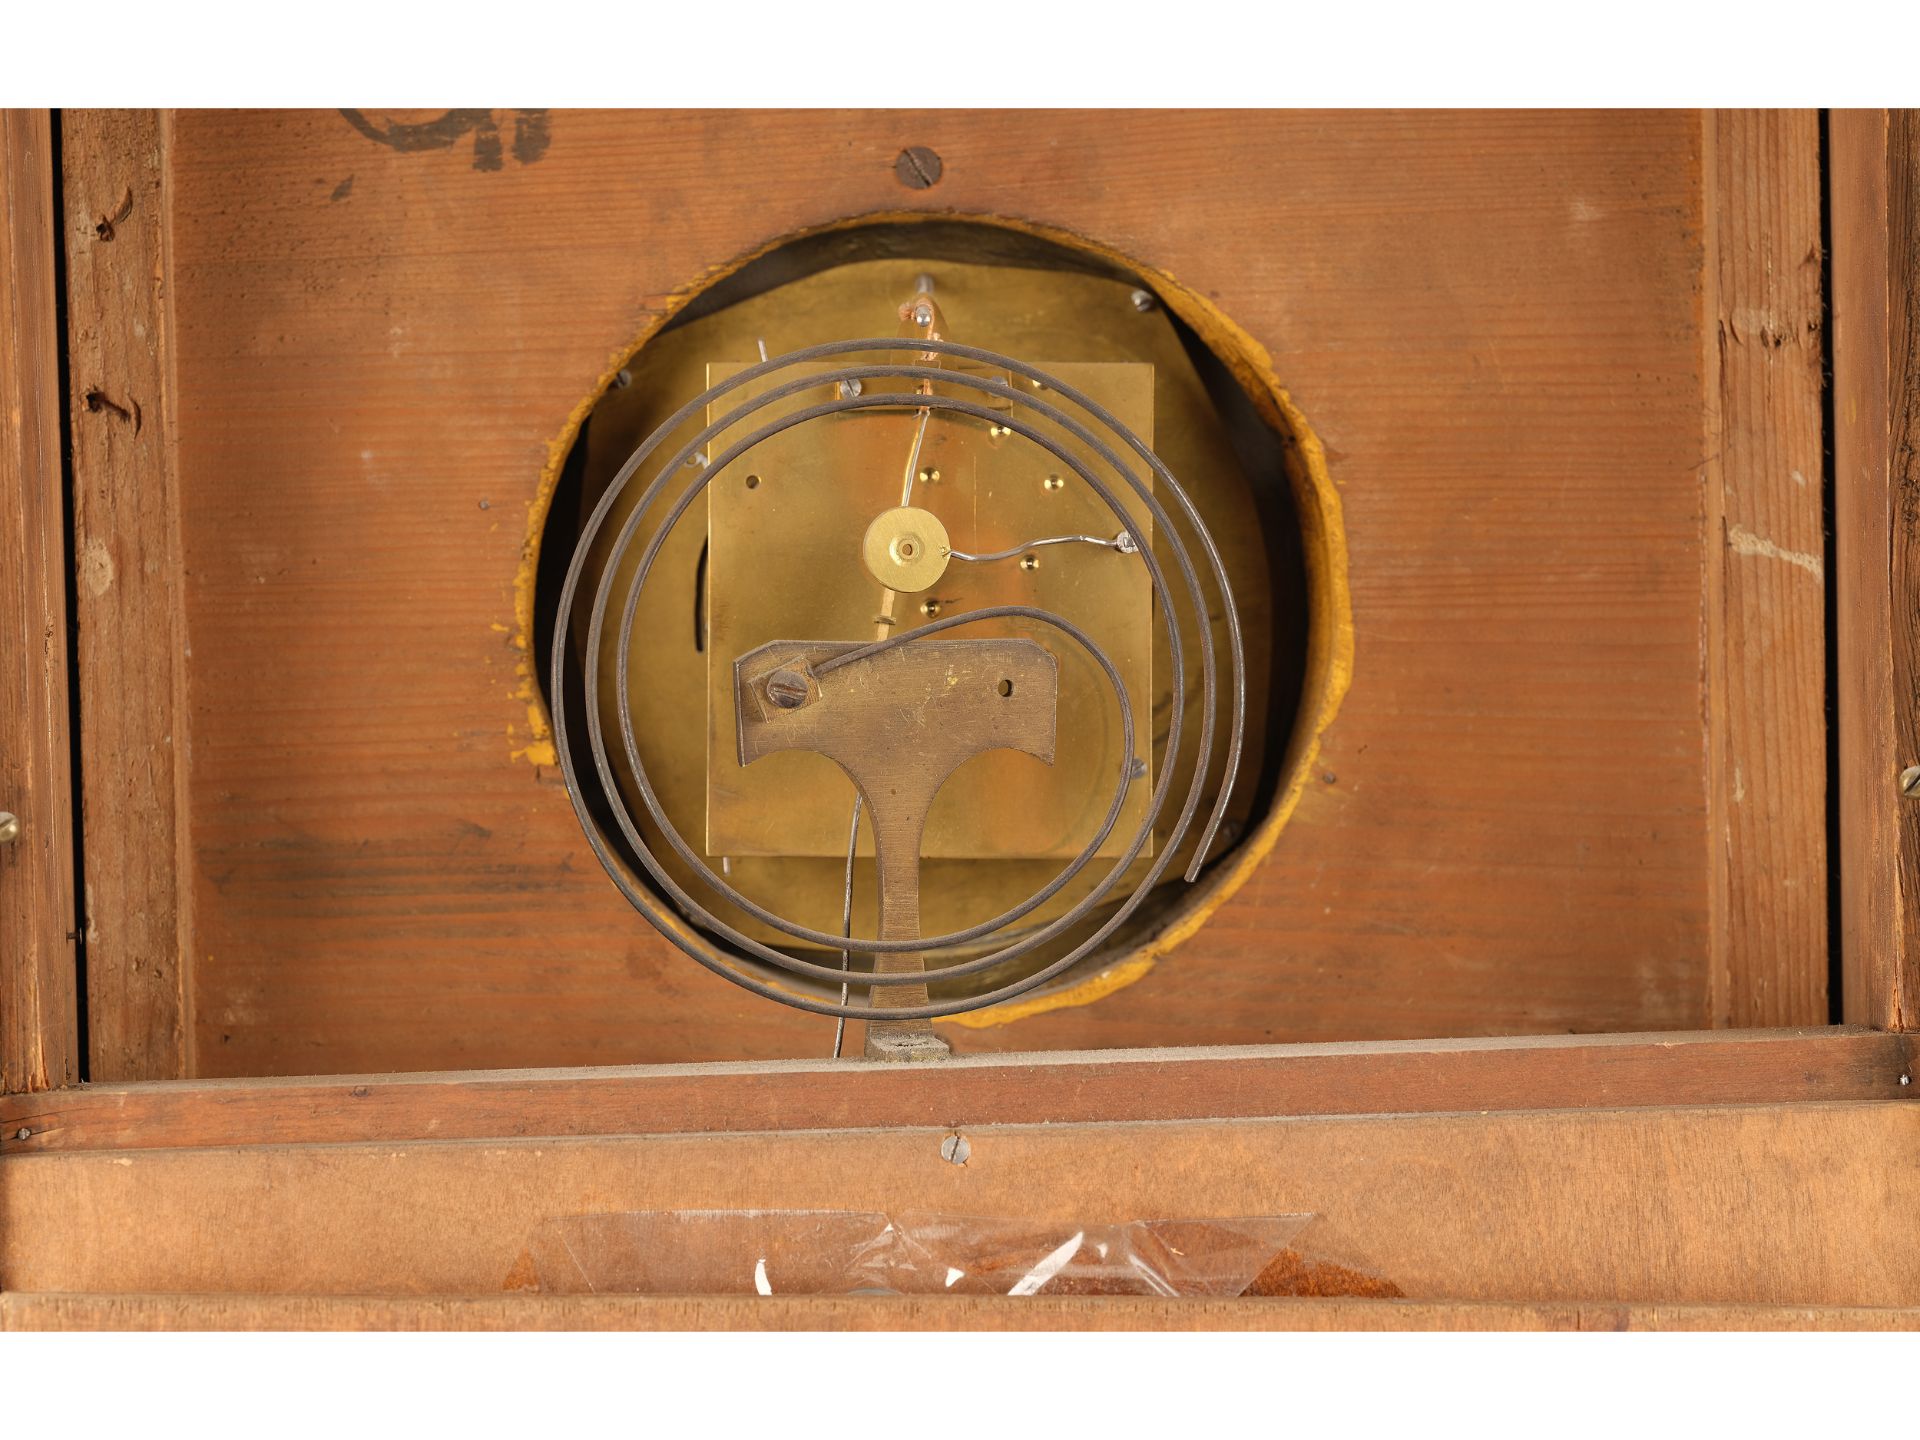 Biedermeier frame clock with musical mechanism, Around 1840/50, Wooden case decorated with relief - Image 5 of 5